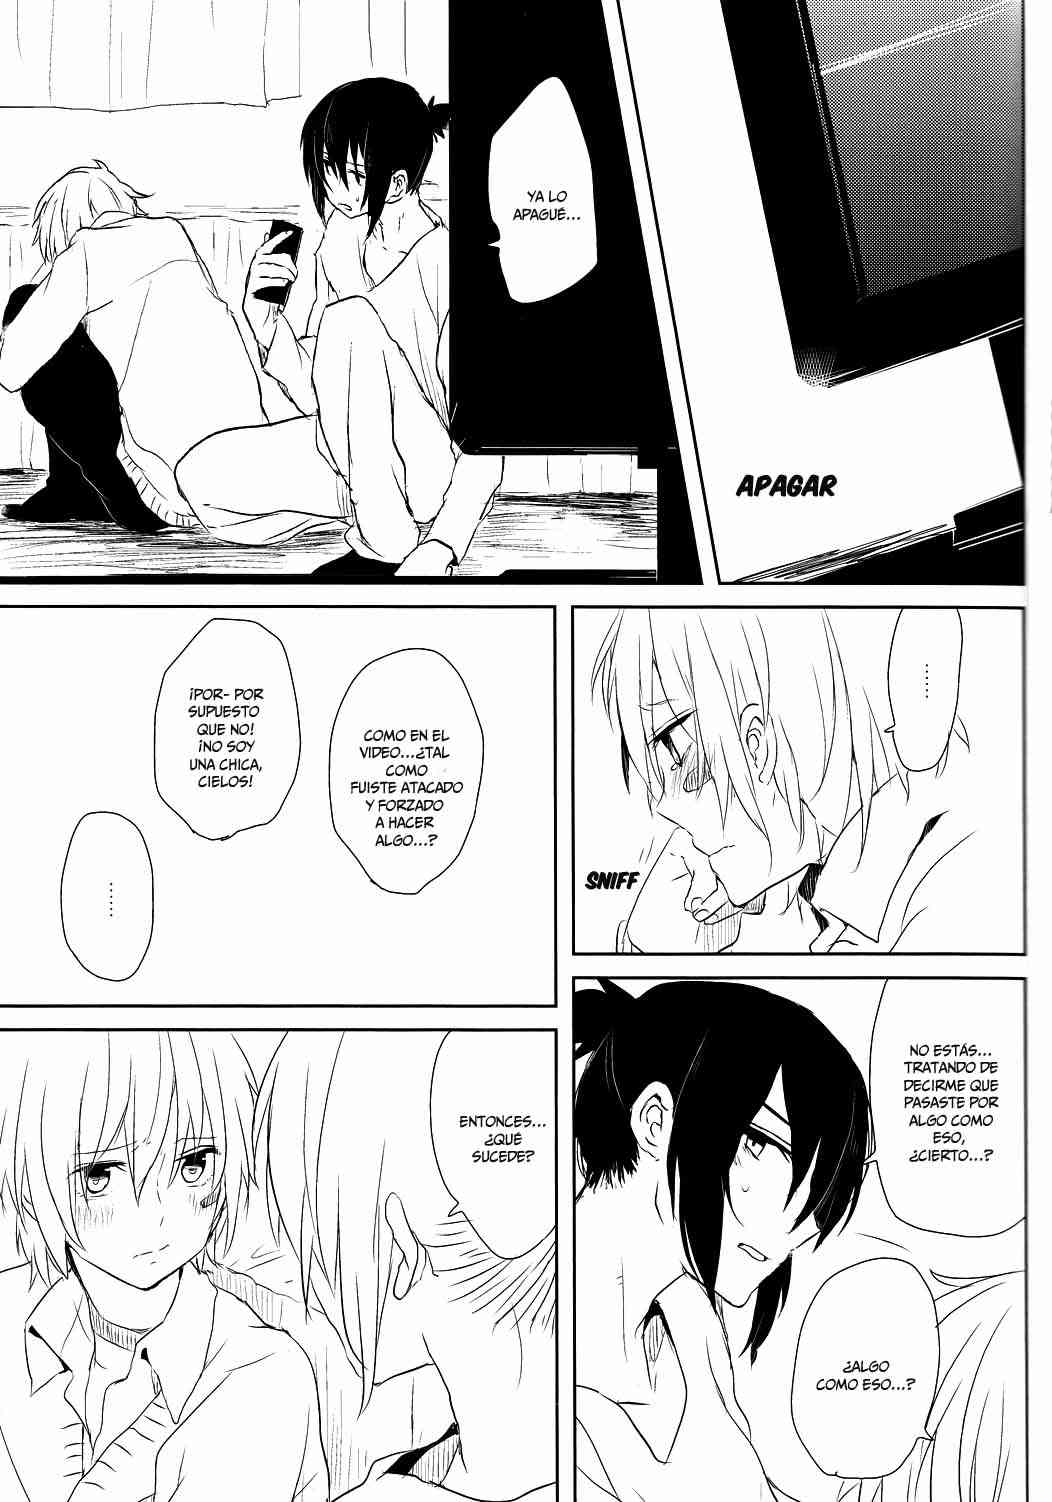 Doujinshi No.6 Determine Your Desire, then Do It Chapter-1 - 15